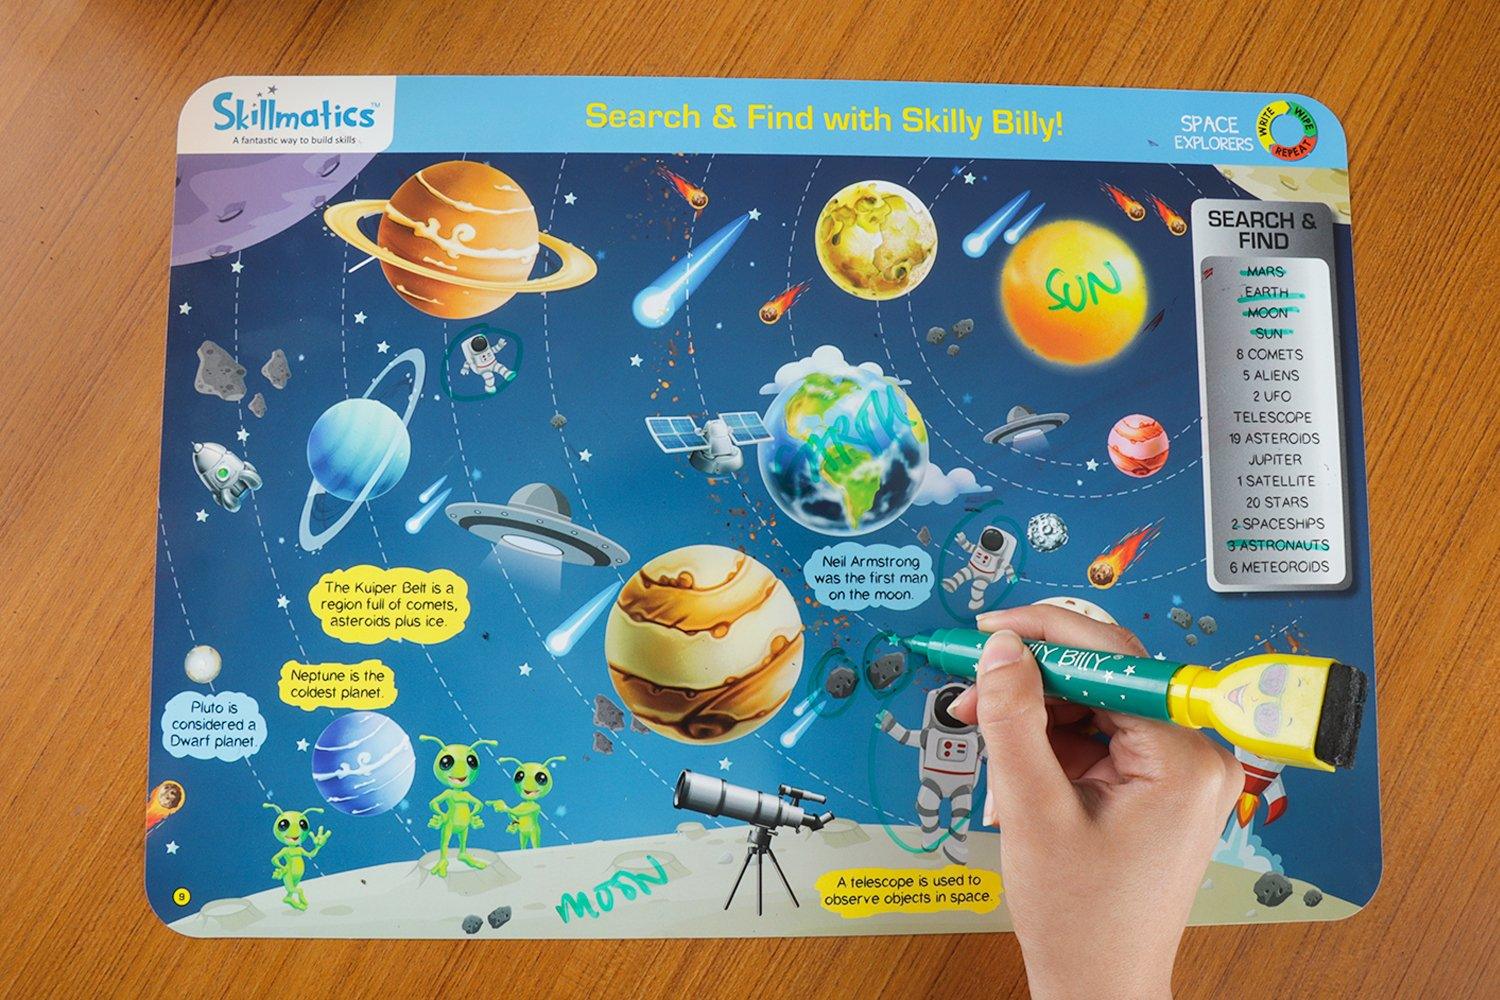 Skillmatics Educational Game: Space Explorers (6-9 Years) | Fun Learning Activities for Kids | Write and Wipe Activity Mats